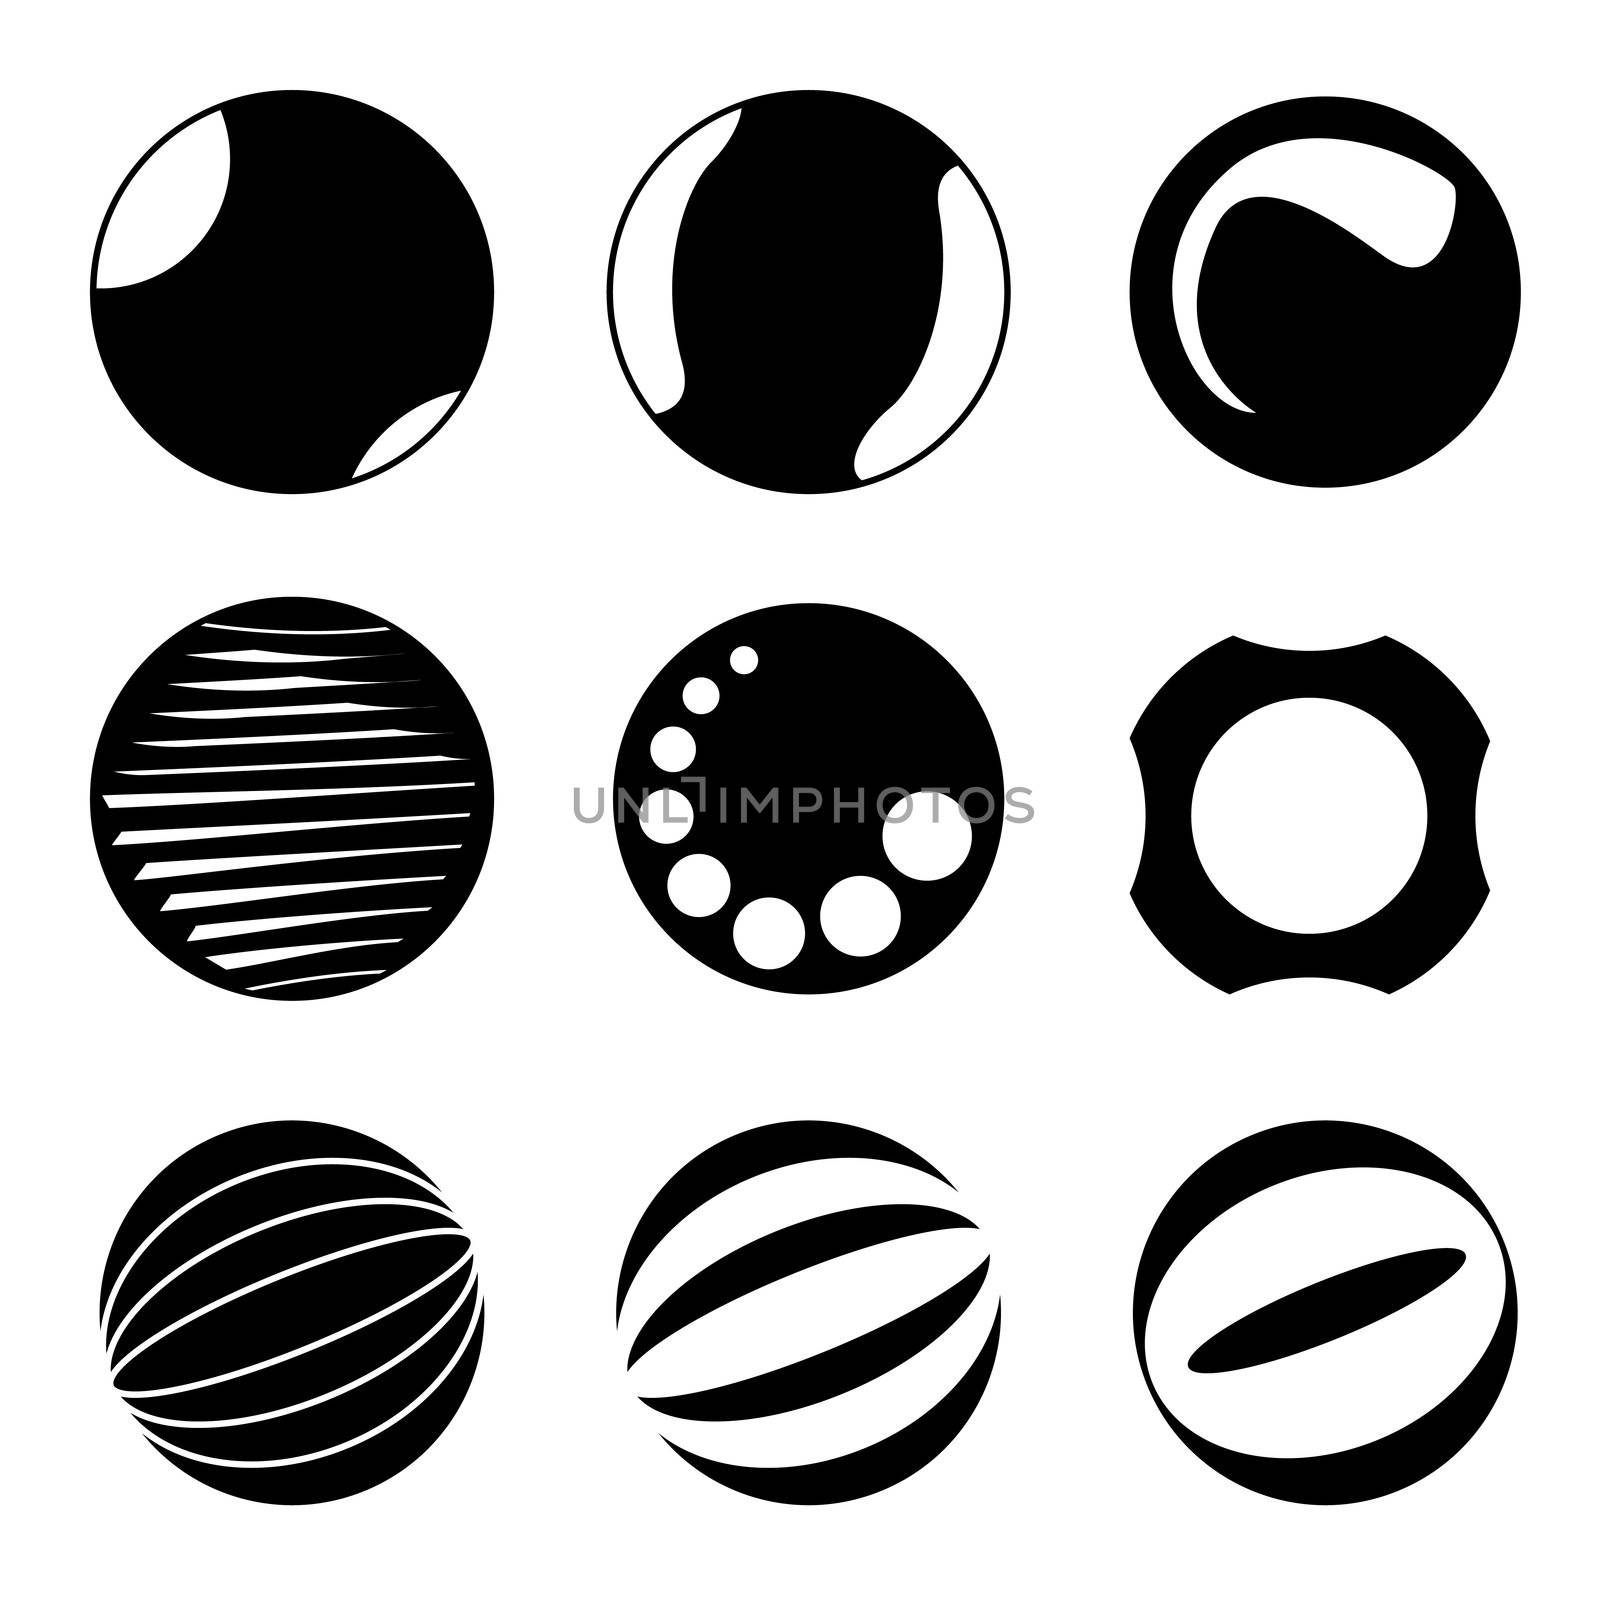 Circle design elements by skvoor